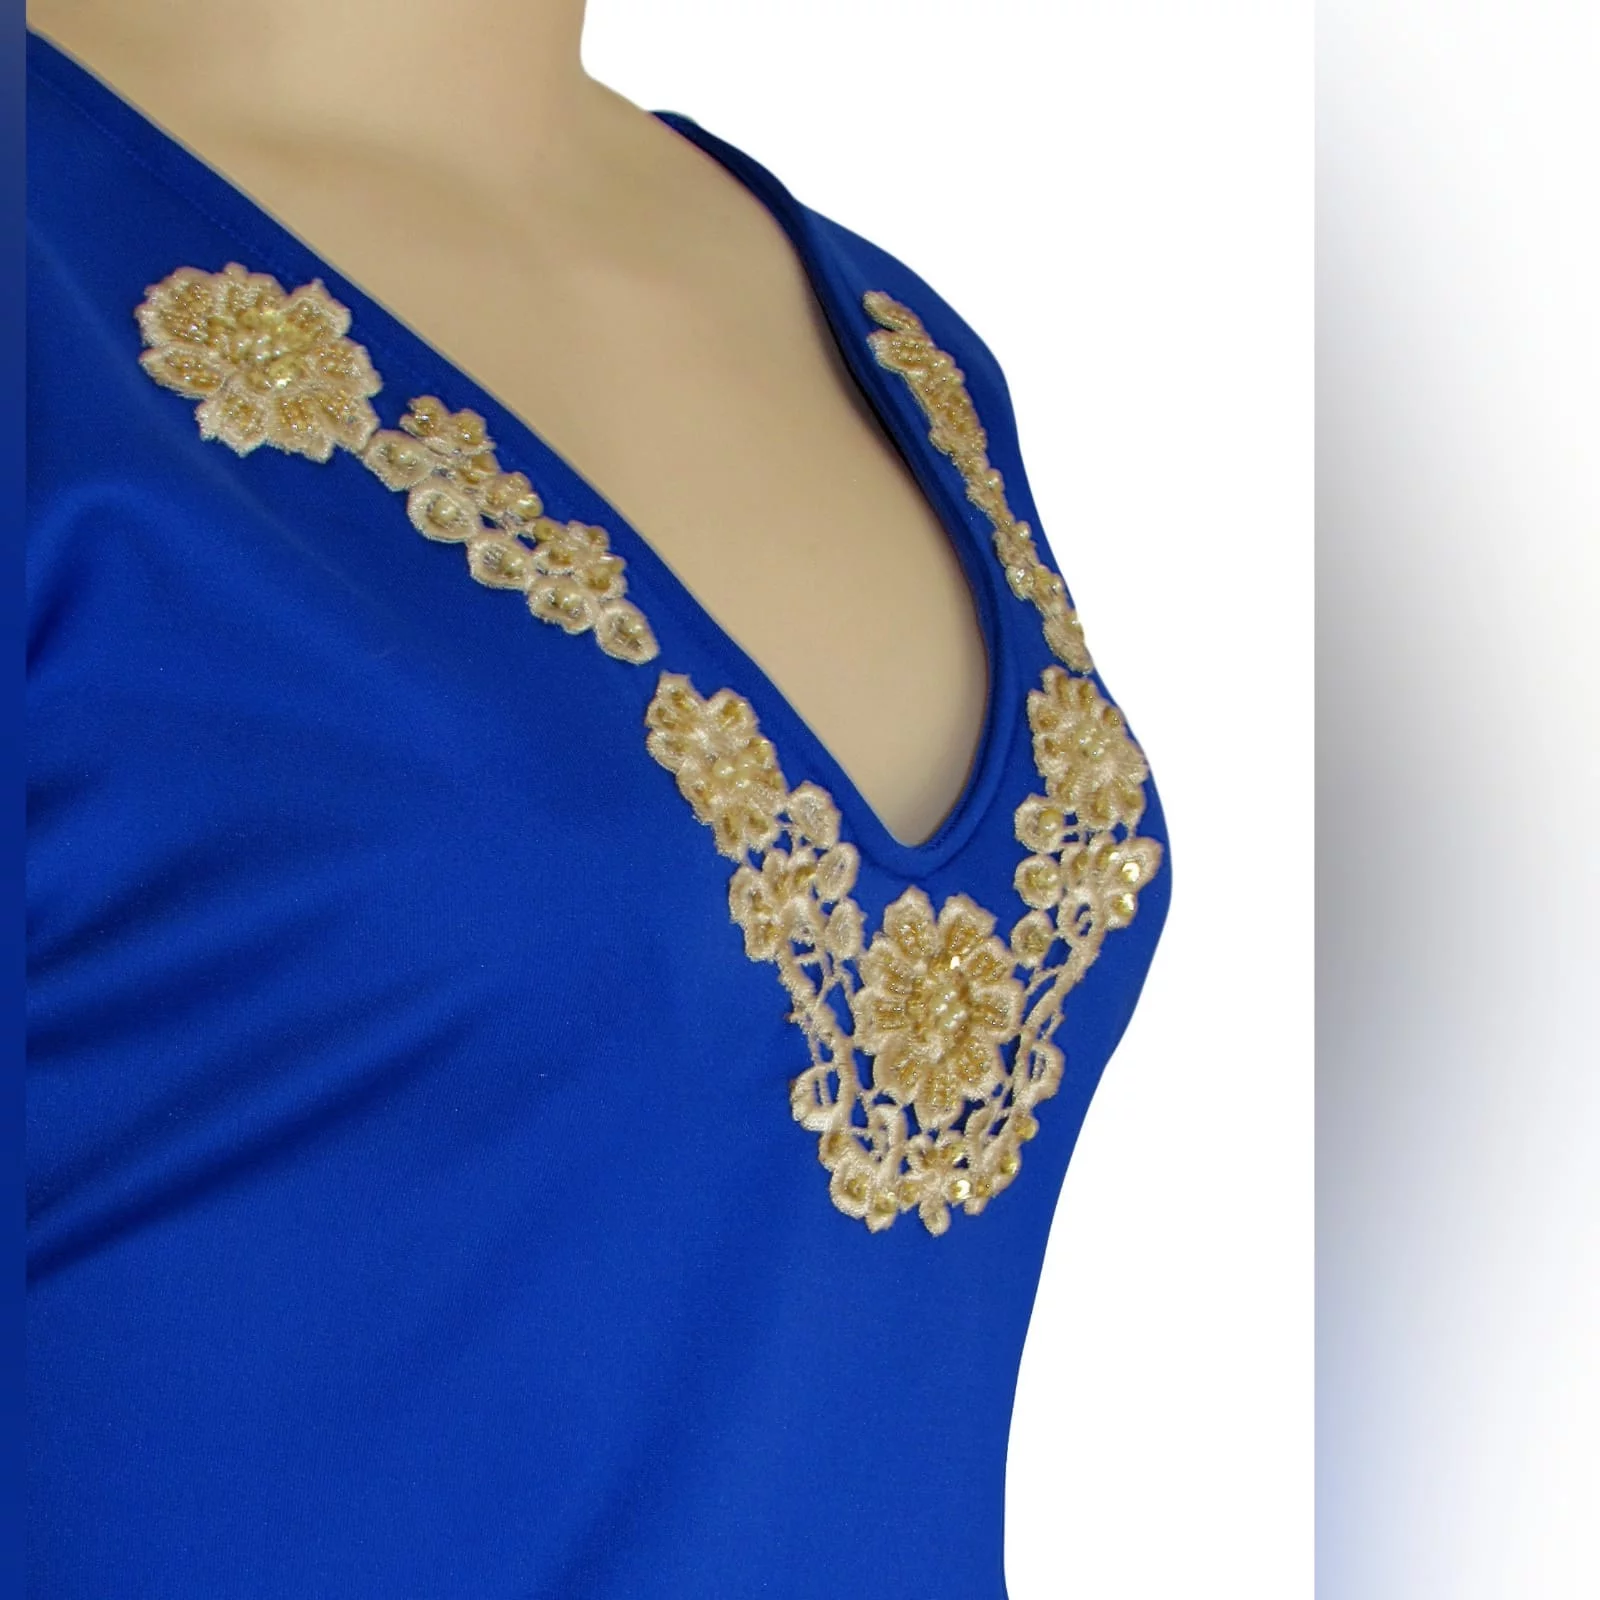 Royal blue & gold peplum smart casual top 3 royal blue & gold peplum smart casual top, long sleeves, v neckline & cuffs detailed with gold beaded lace